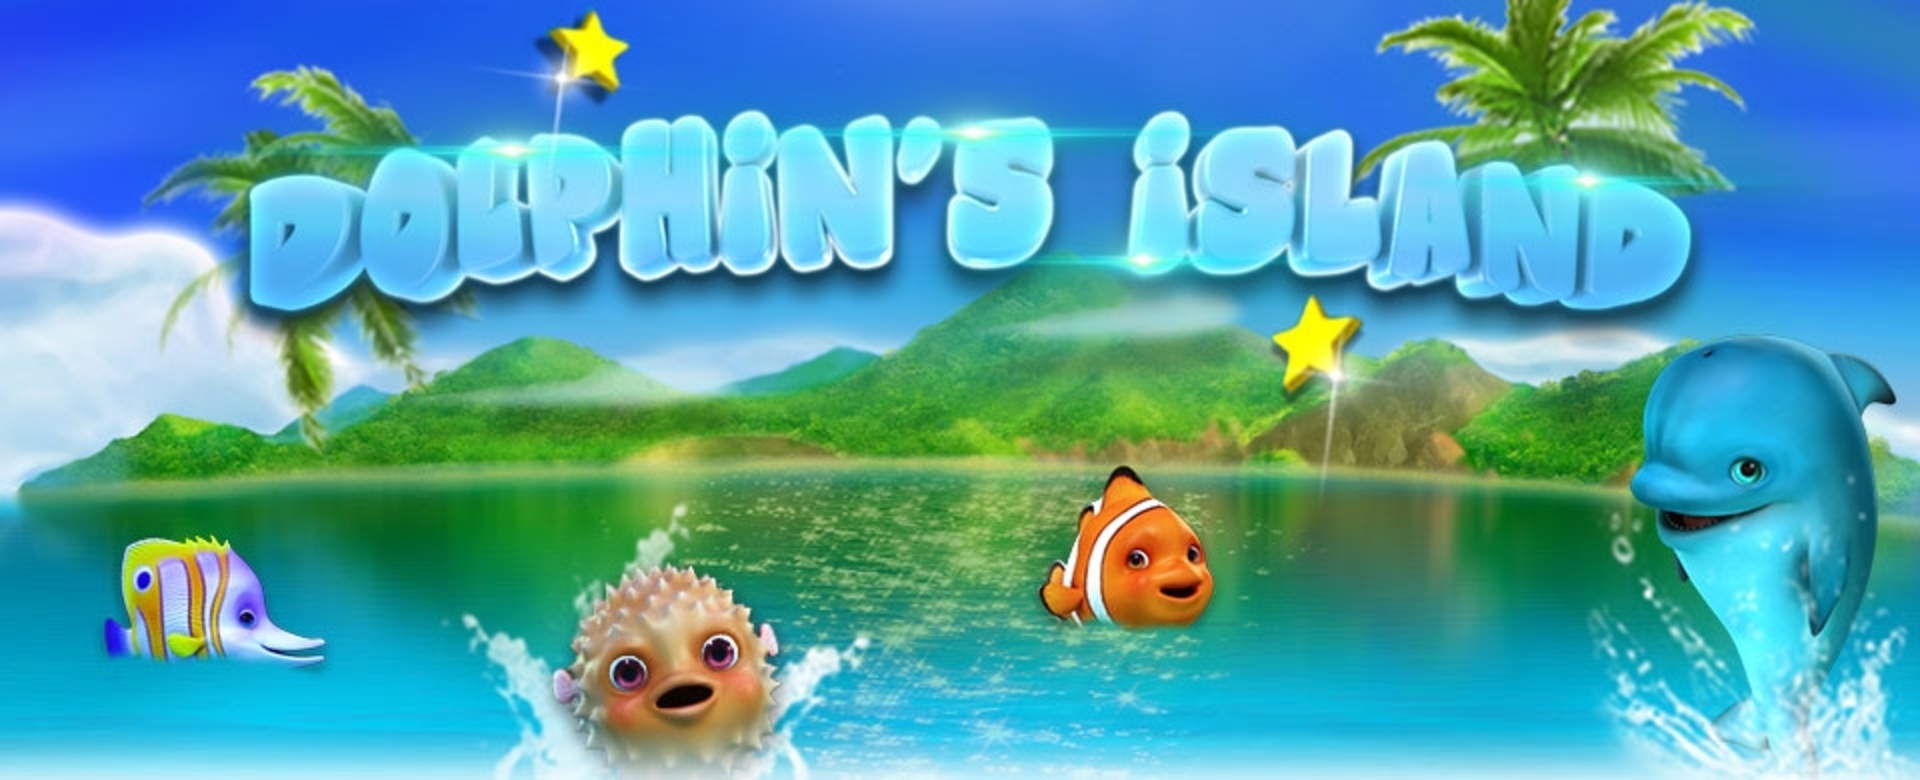 The Dolphin's Island Online Slot Demo Game by iSoftBet